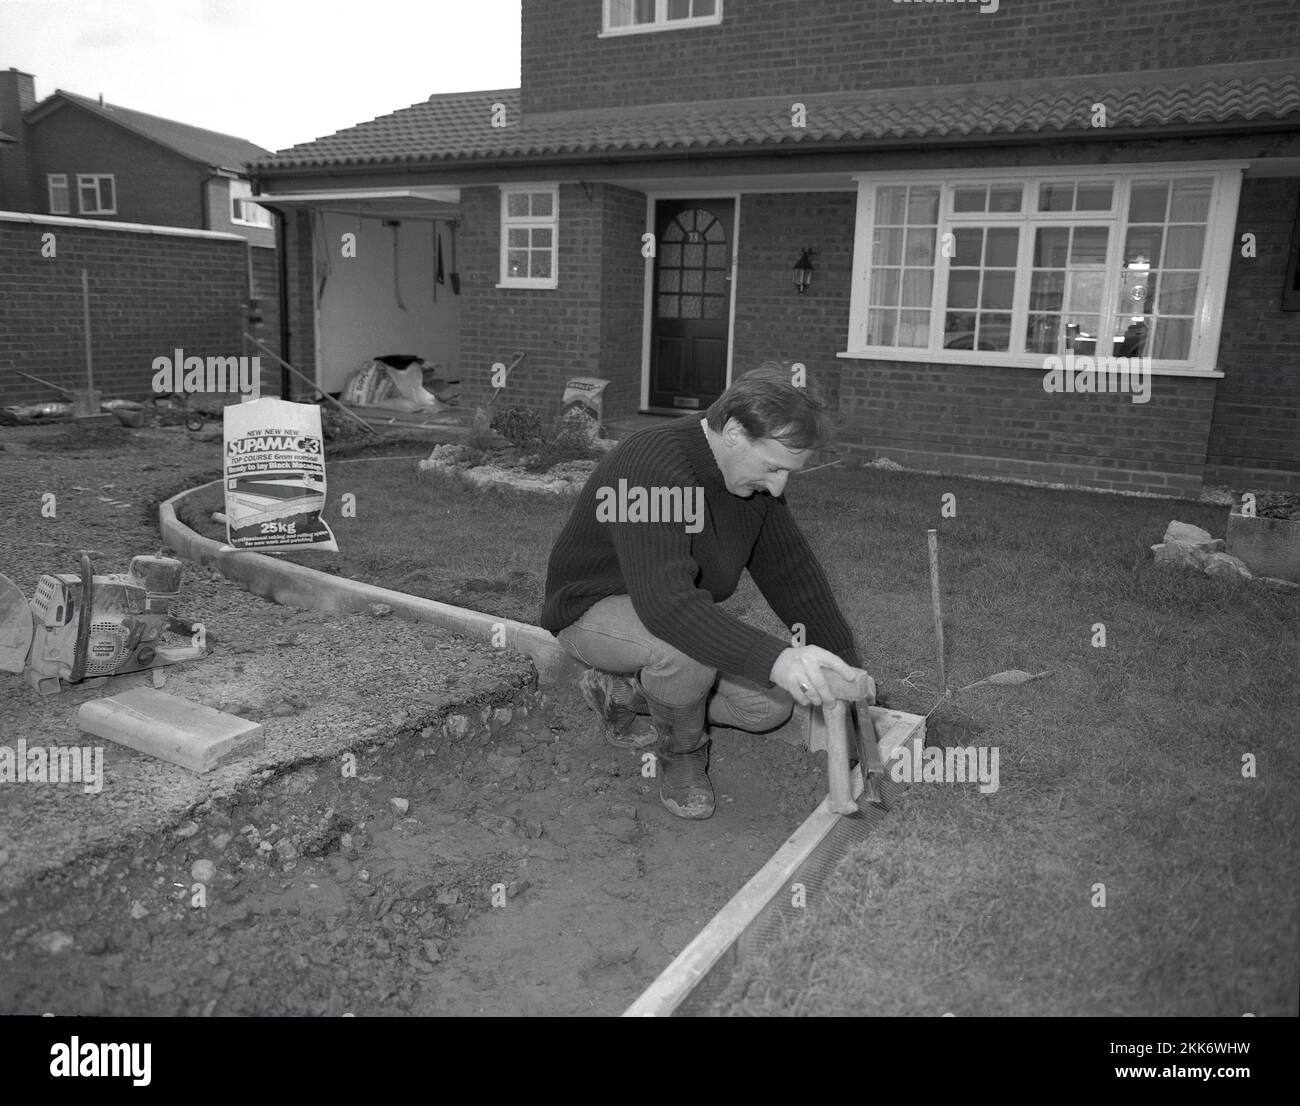 1980s, construction, a man extending and resurfacing an area on a driveway and path at the front of a detached house, installing new concrete edging, England, UK. Stock Photo